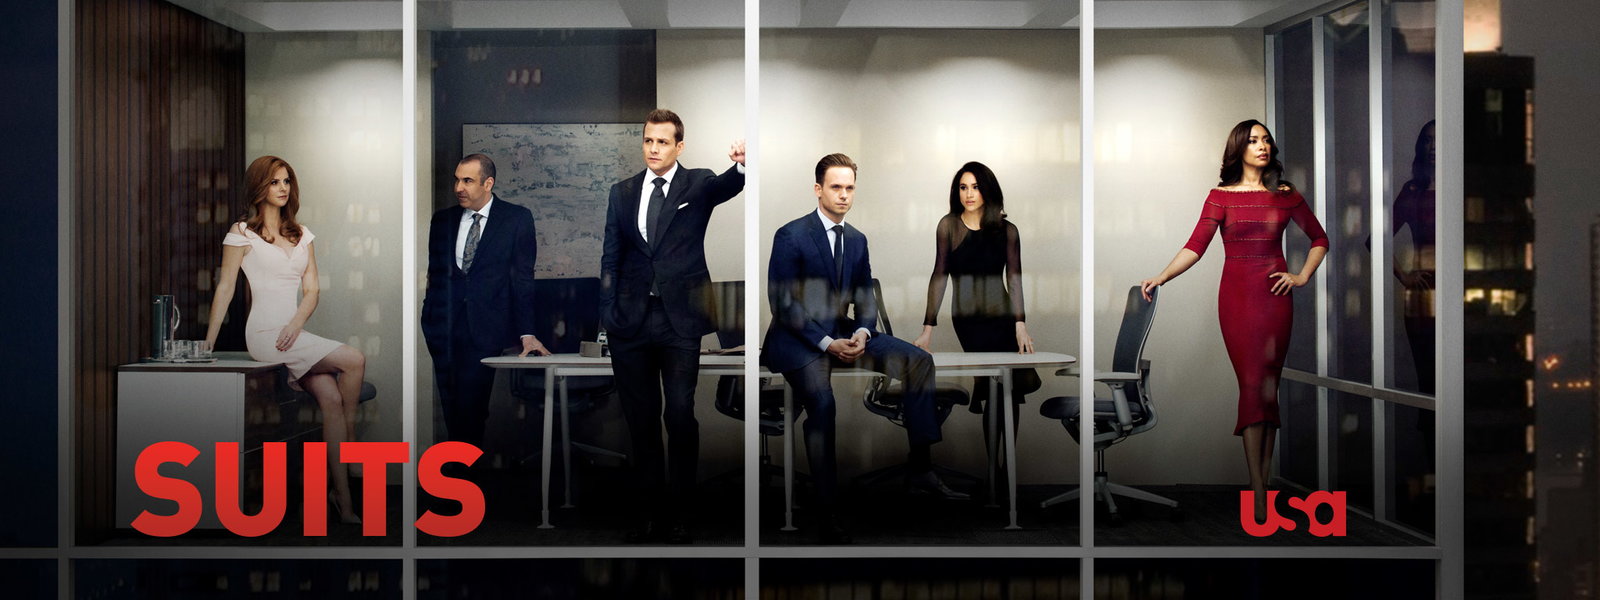 Watch Suits Online | Stream on Hulu